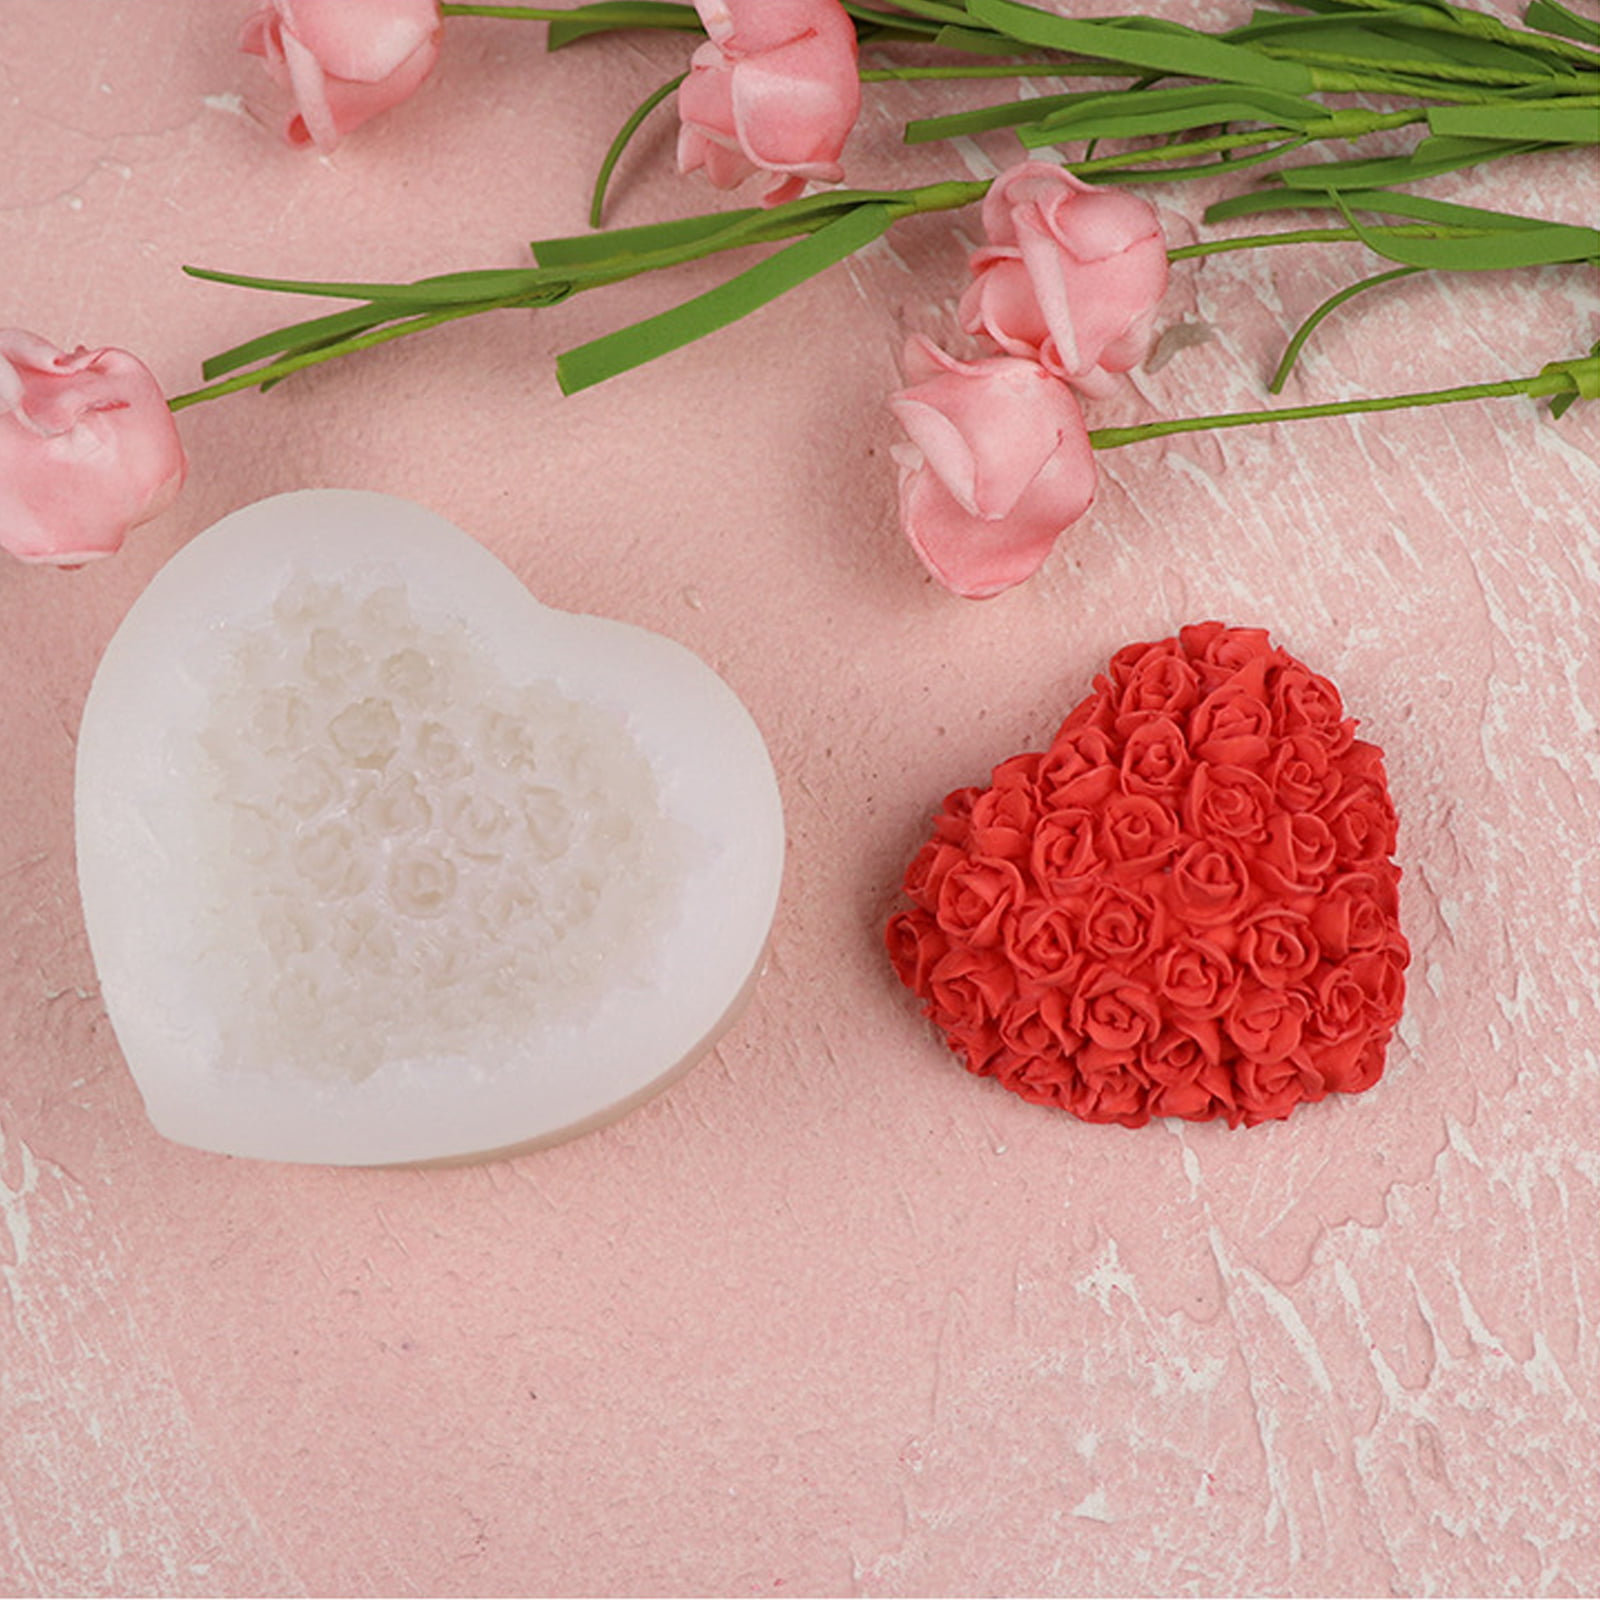 3PCS Rose Butterfly Leaf Silicone Mold Small Soap Clay Fimo Chocolate  Sugarcraft Baking Tool DIY Cake Silicone Mold for Baby Shower Party  Birthday